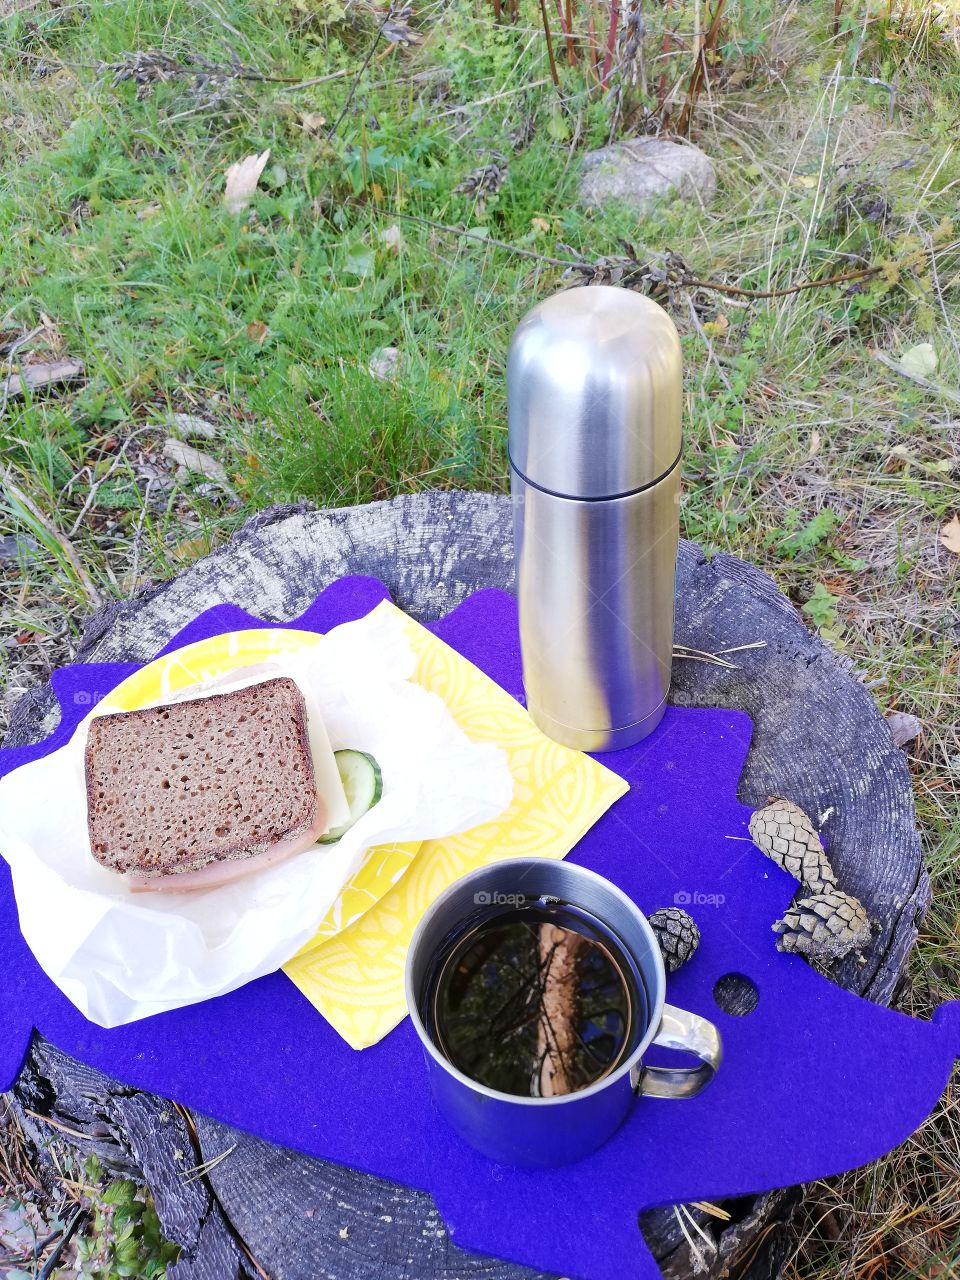 A thermos made of steel, a metallic mug, a sandwich, a paper bag, yellow and white patterned napkin and plate on a violet hedgehog place mat on a stump. A reflection on the coffee, cones and needles